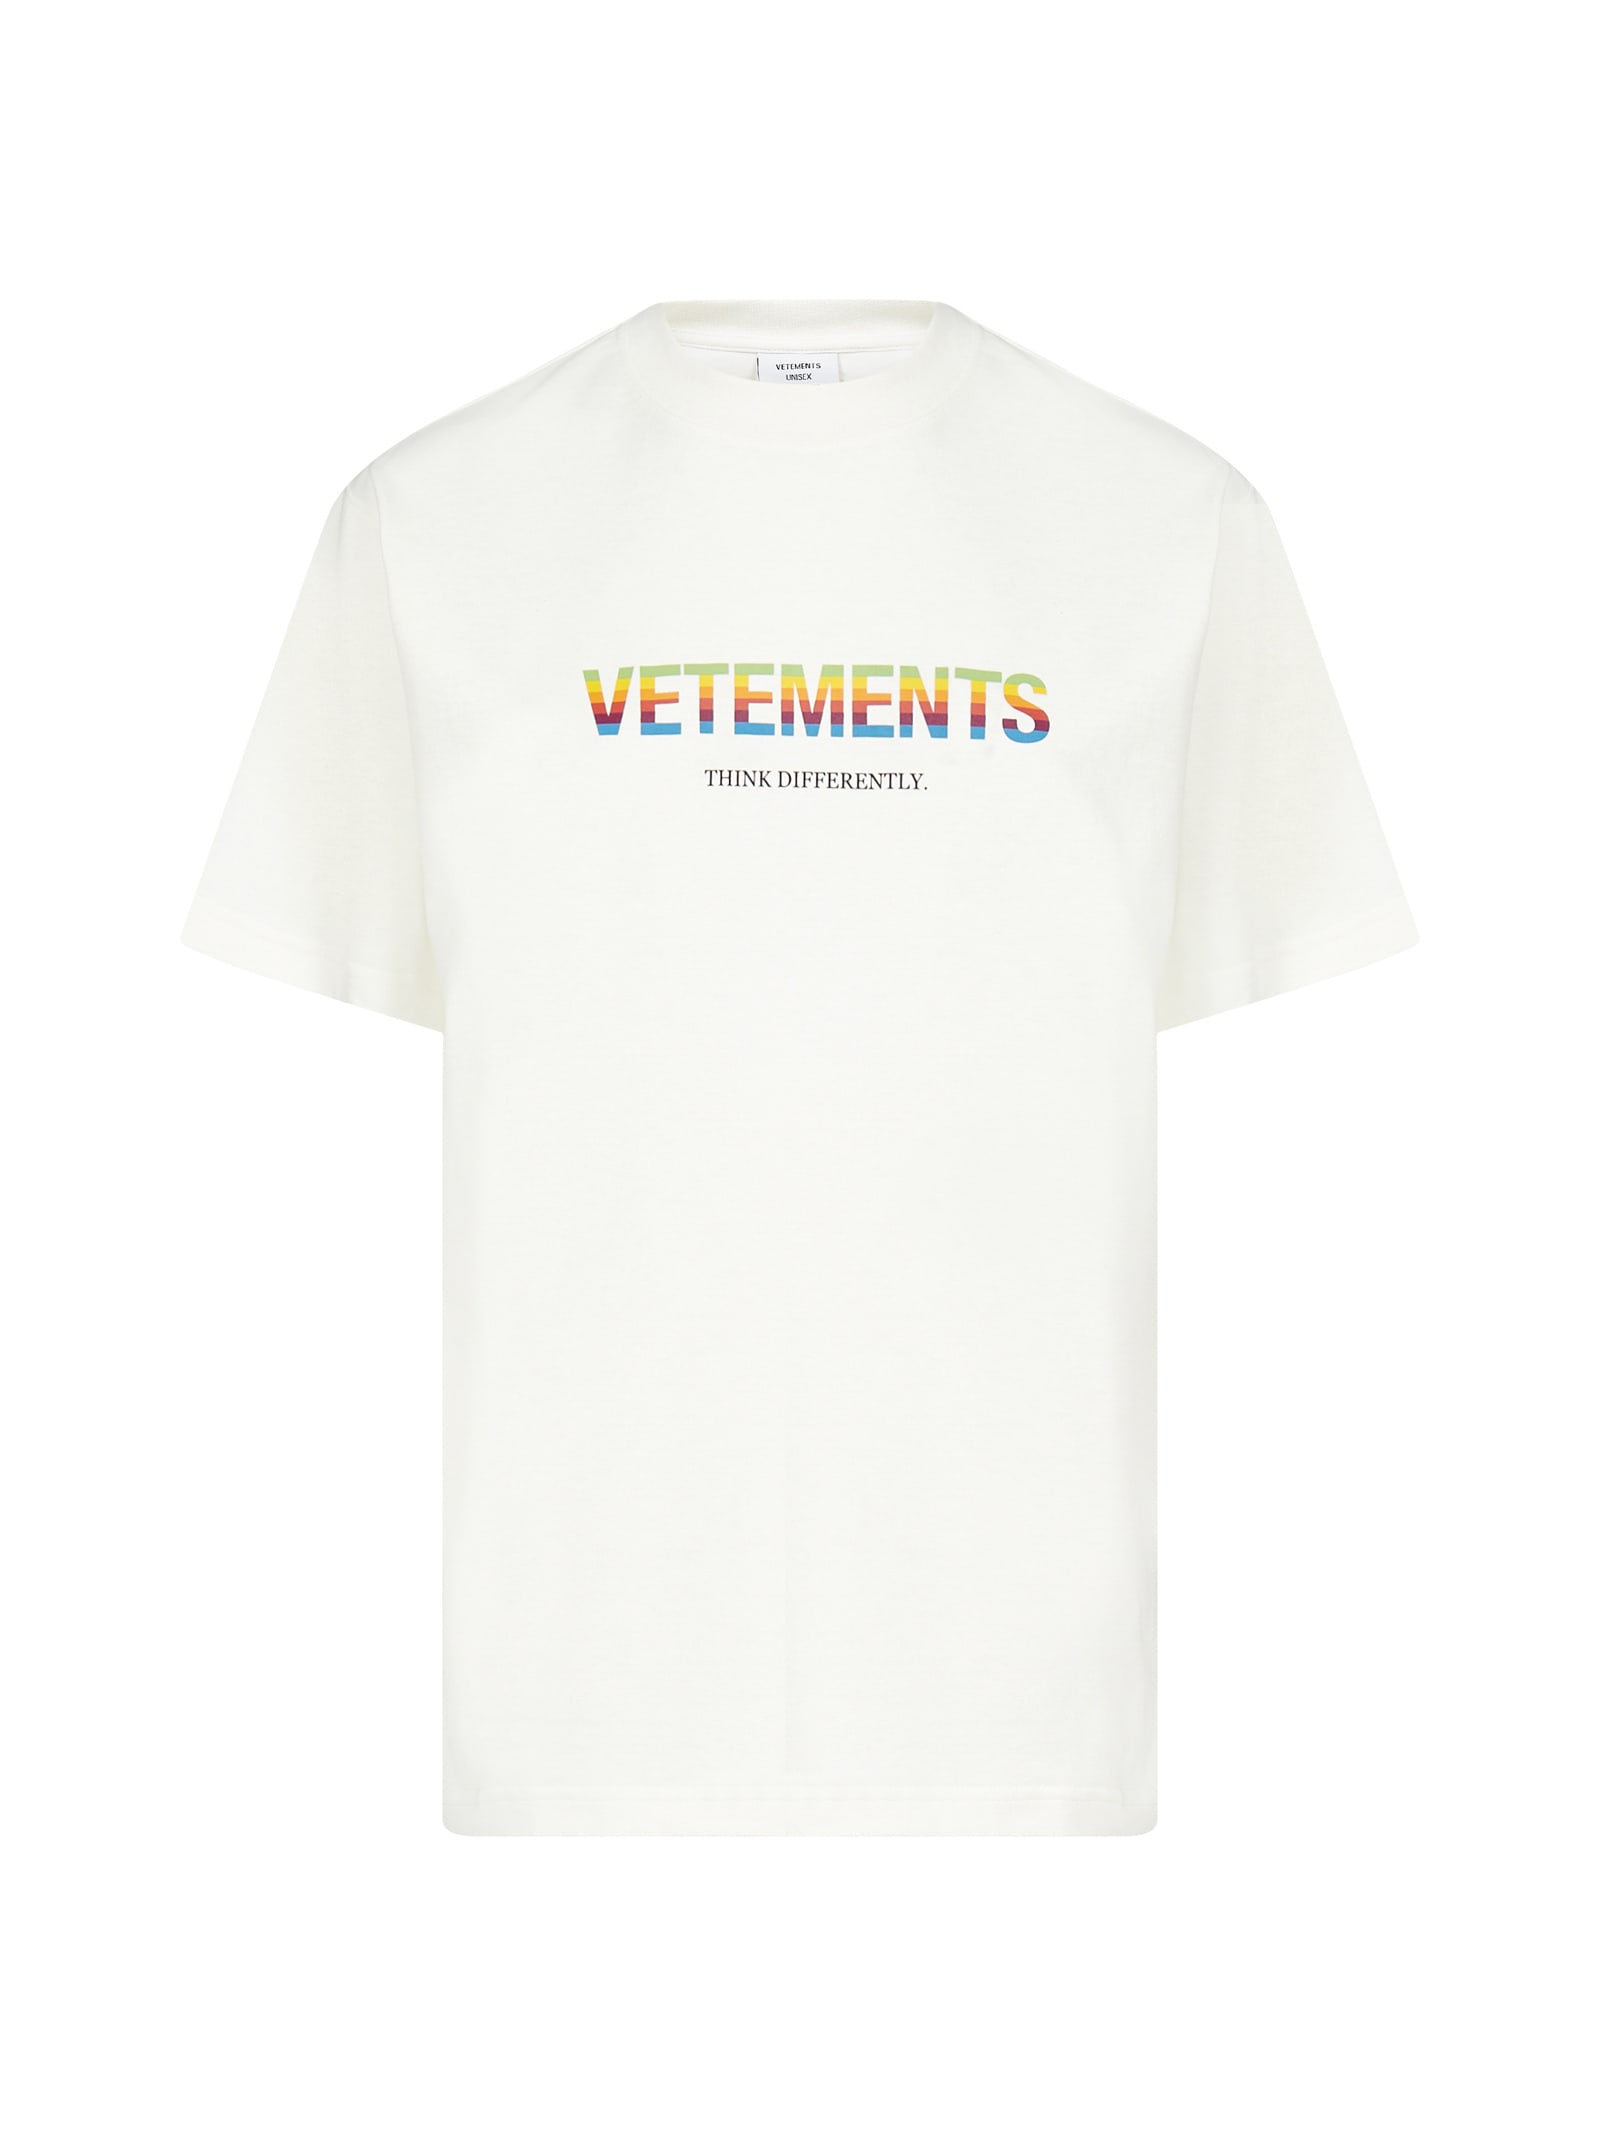 VETEMENTS Think Differently Cotton T-shirt